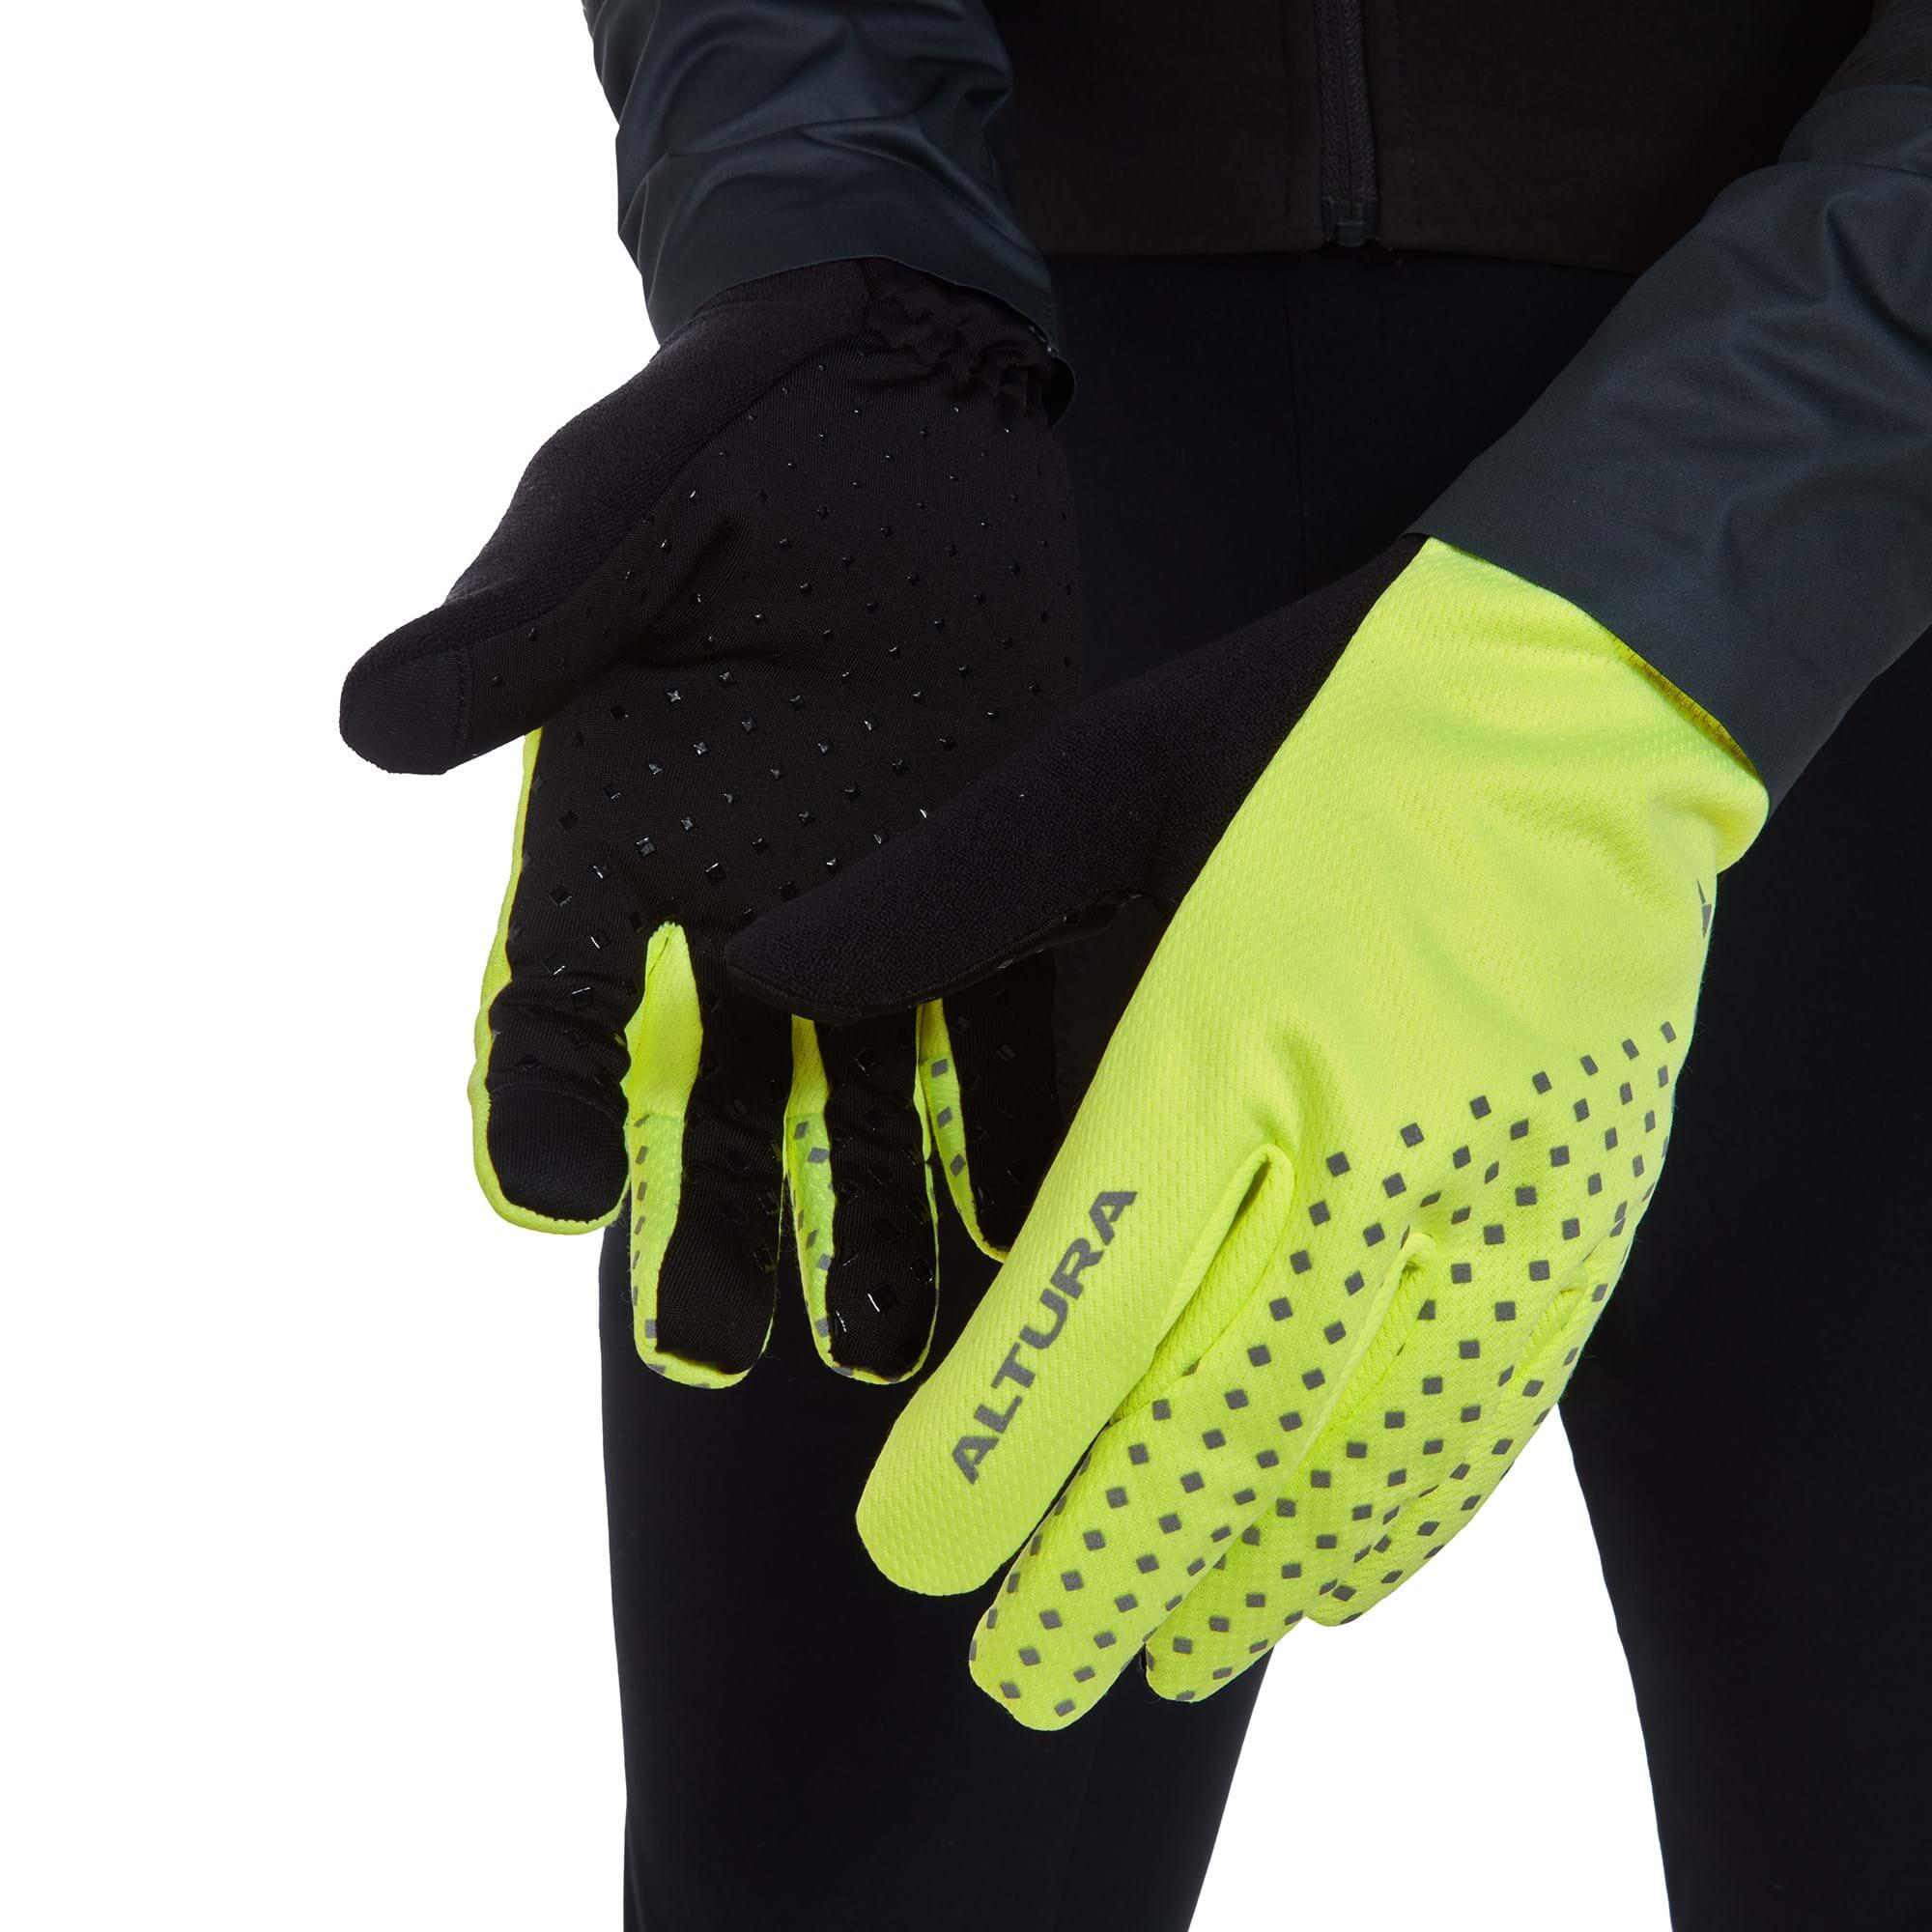 Nightvision Unisex Windproof Fleece Cycling Gloves 3/5